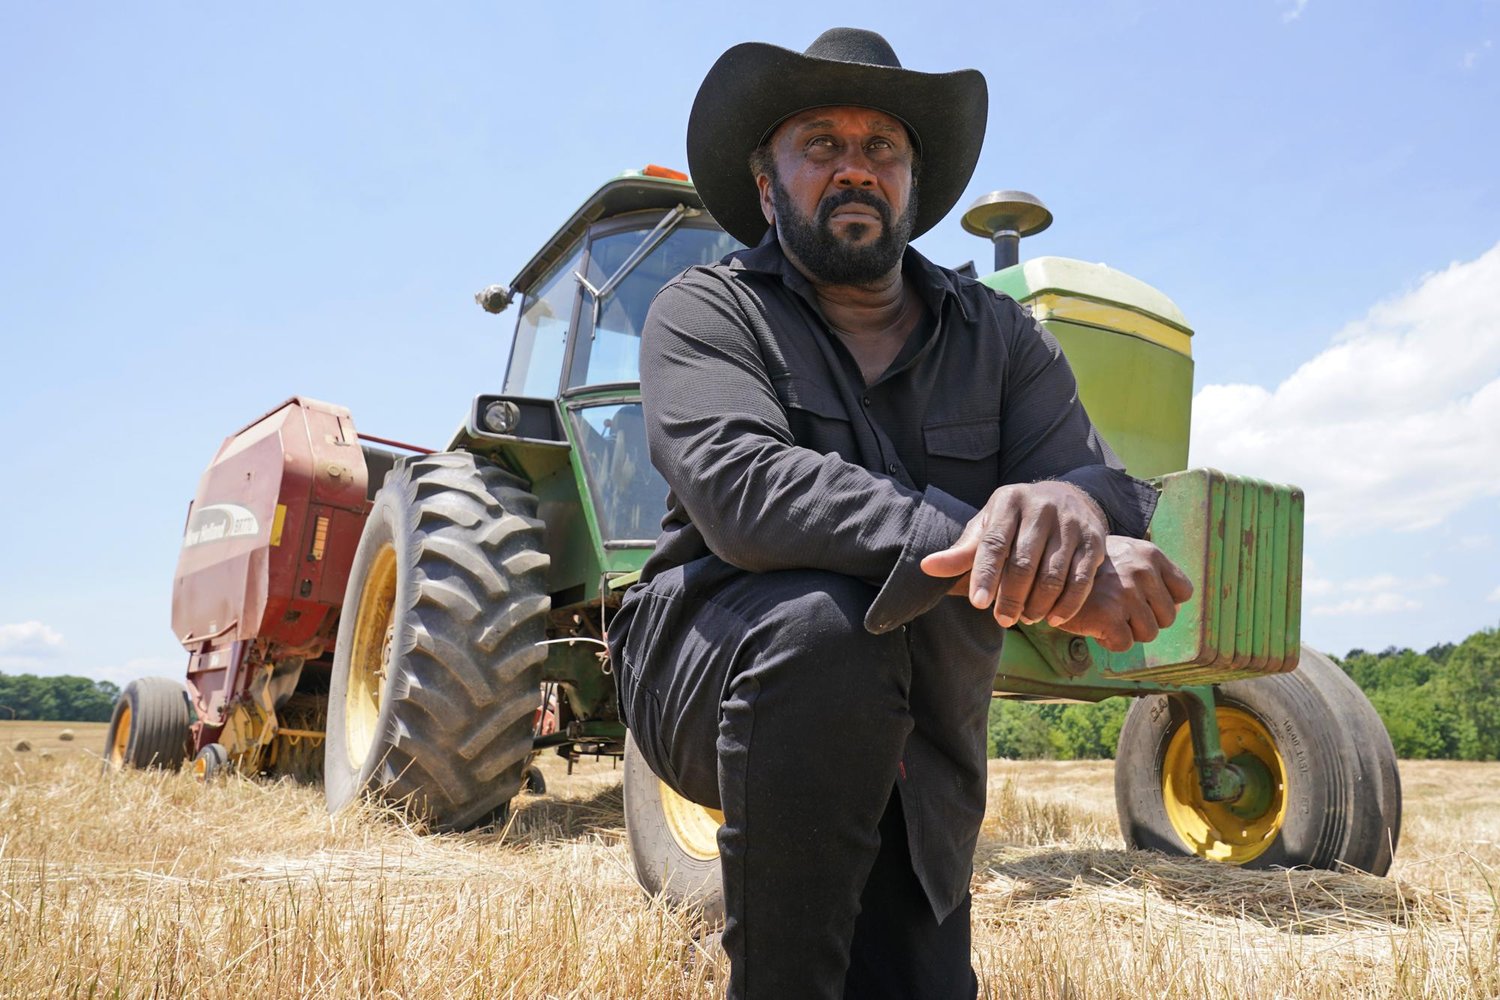 “It Tears You Apart Mentally and Physically”: The Health Crisis Afflicting Black Farmers